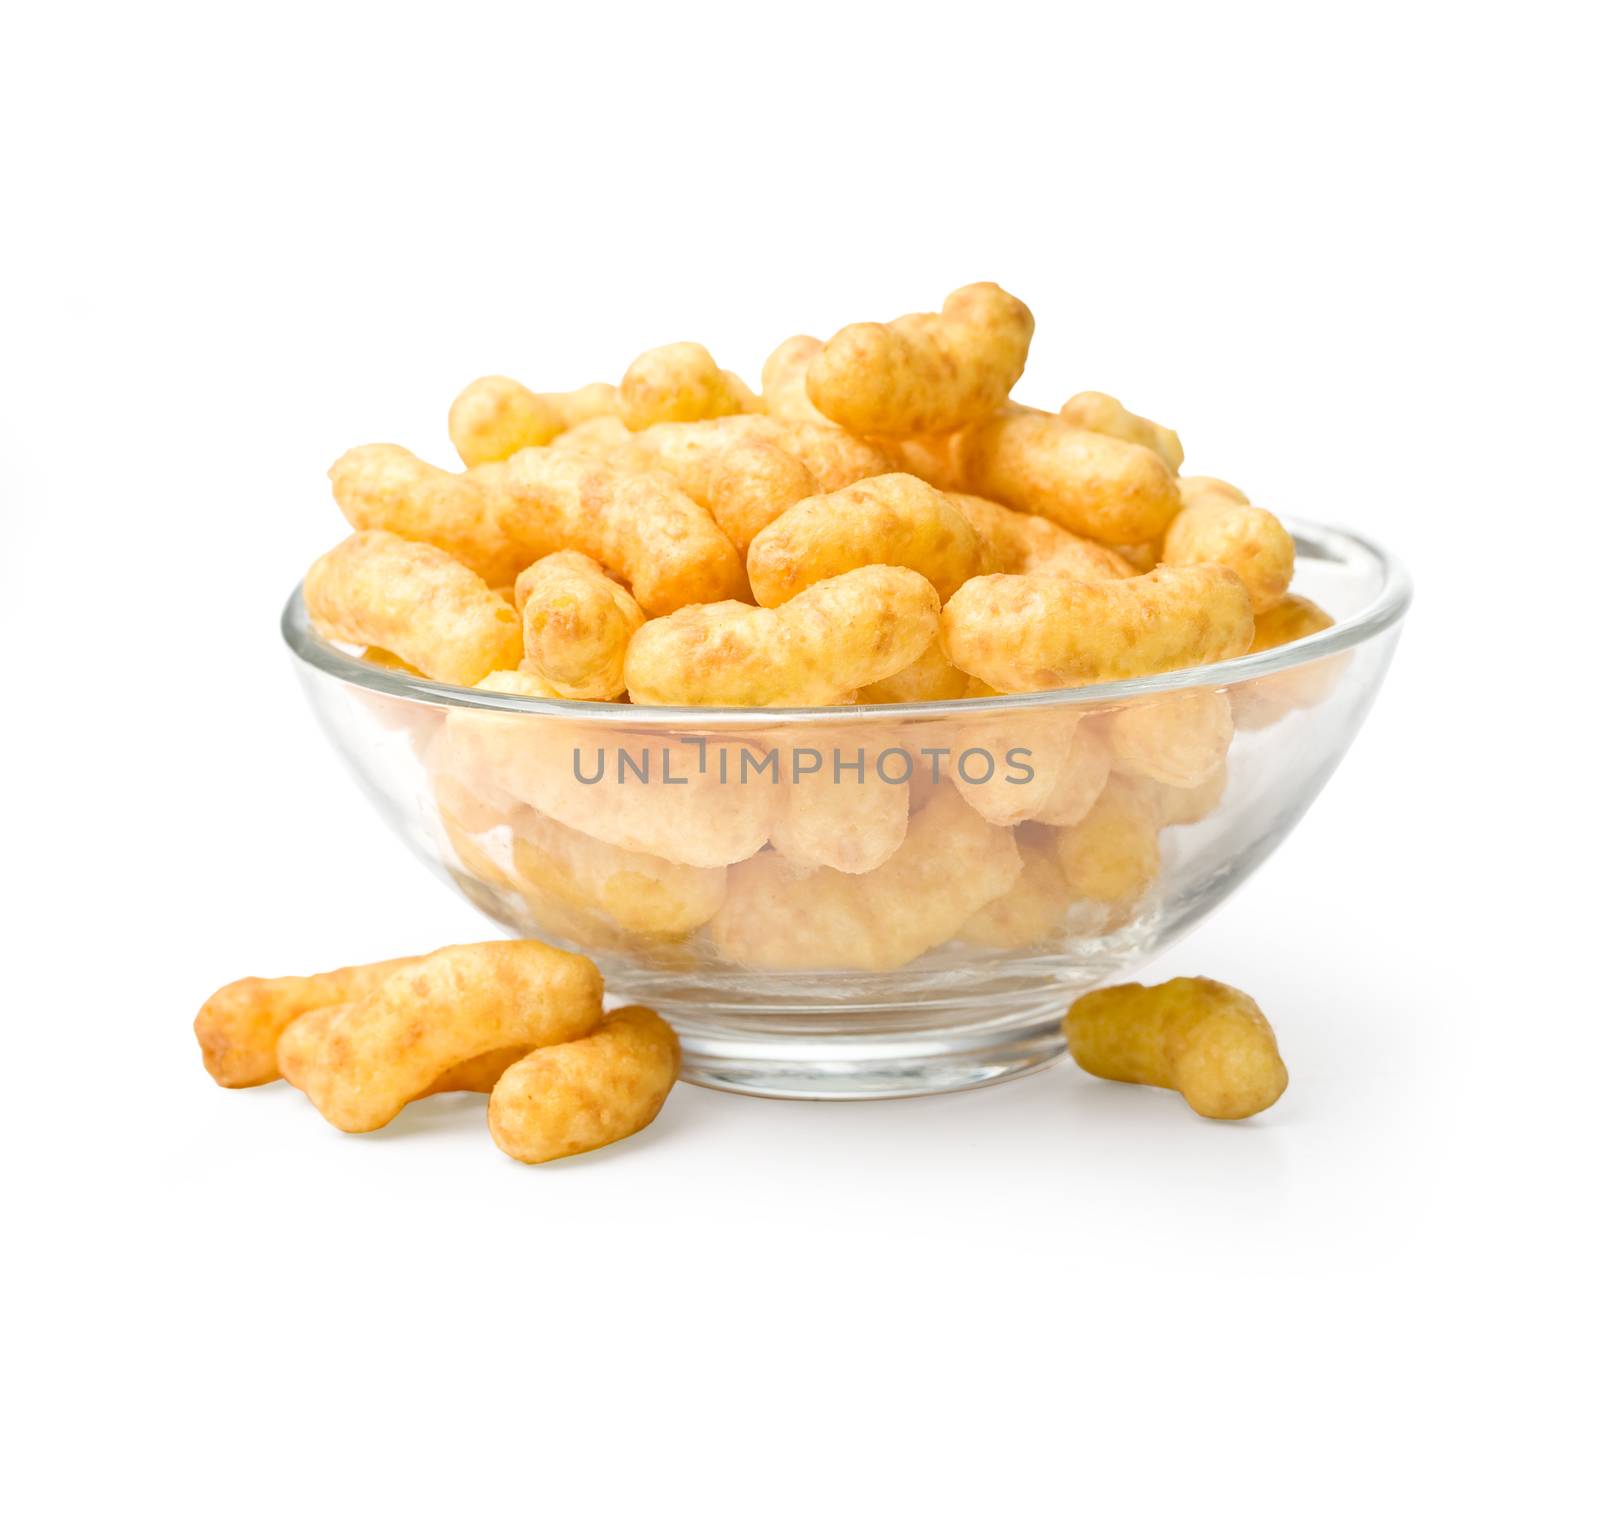 Flips snacks on the plate. With clipping path